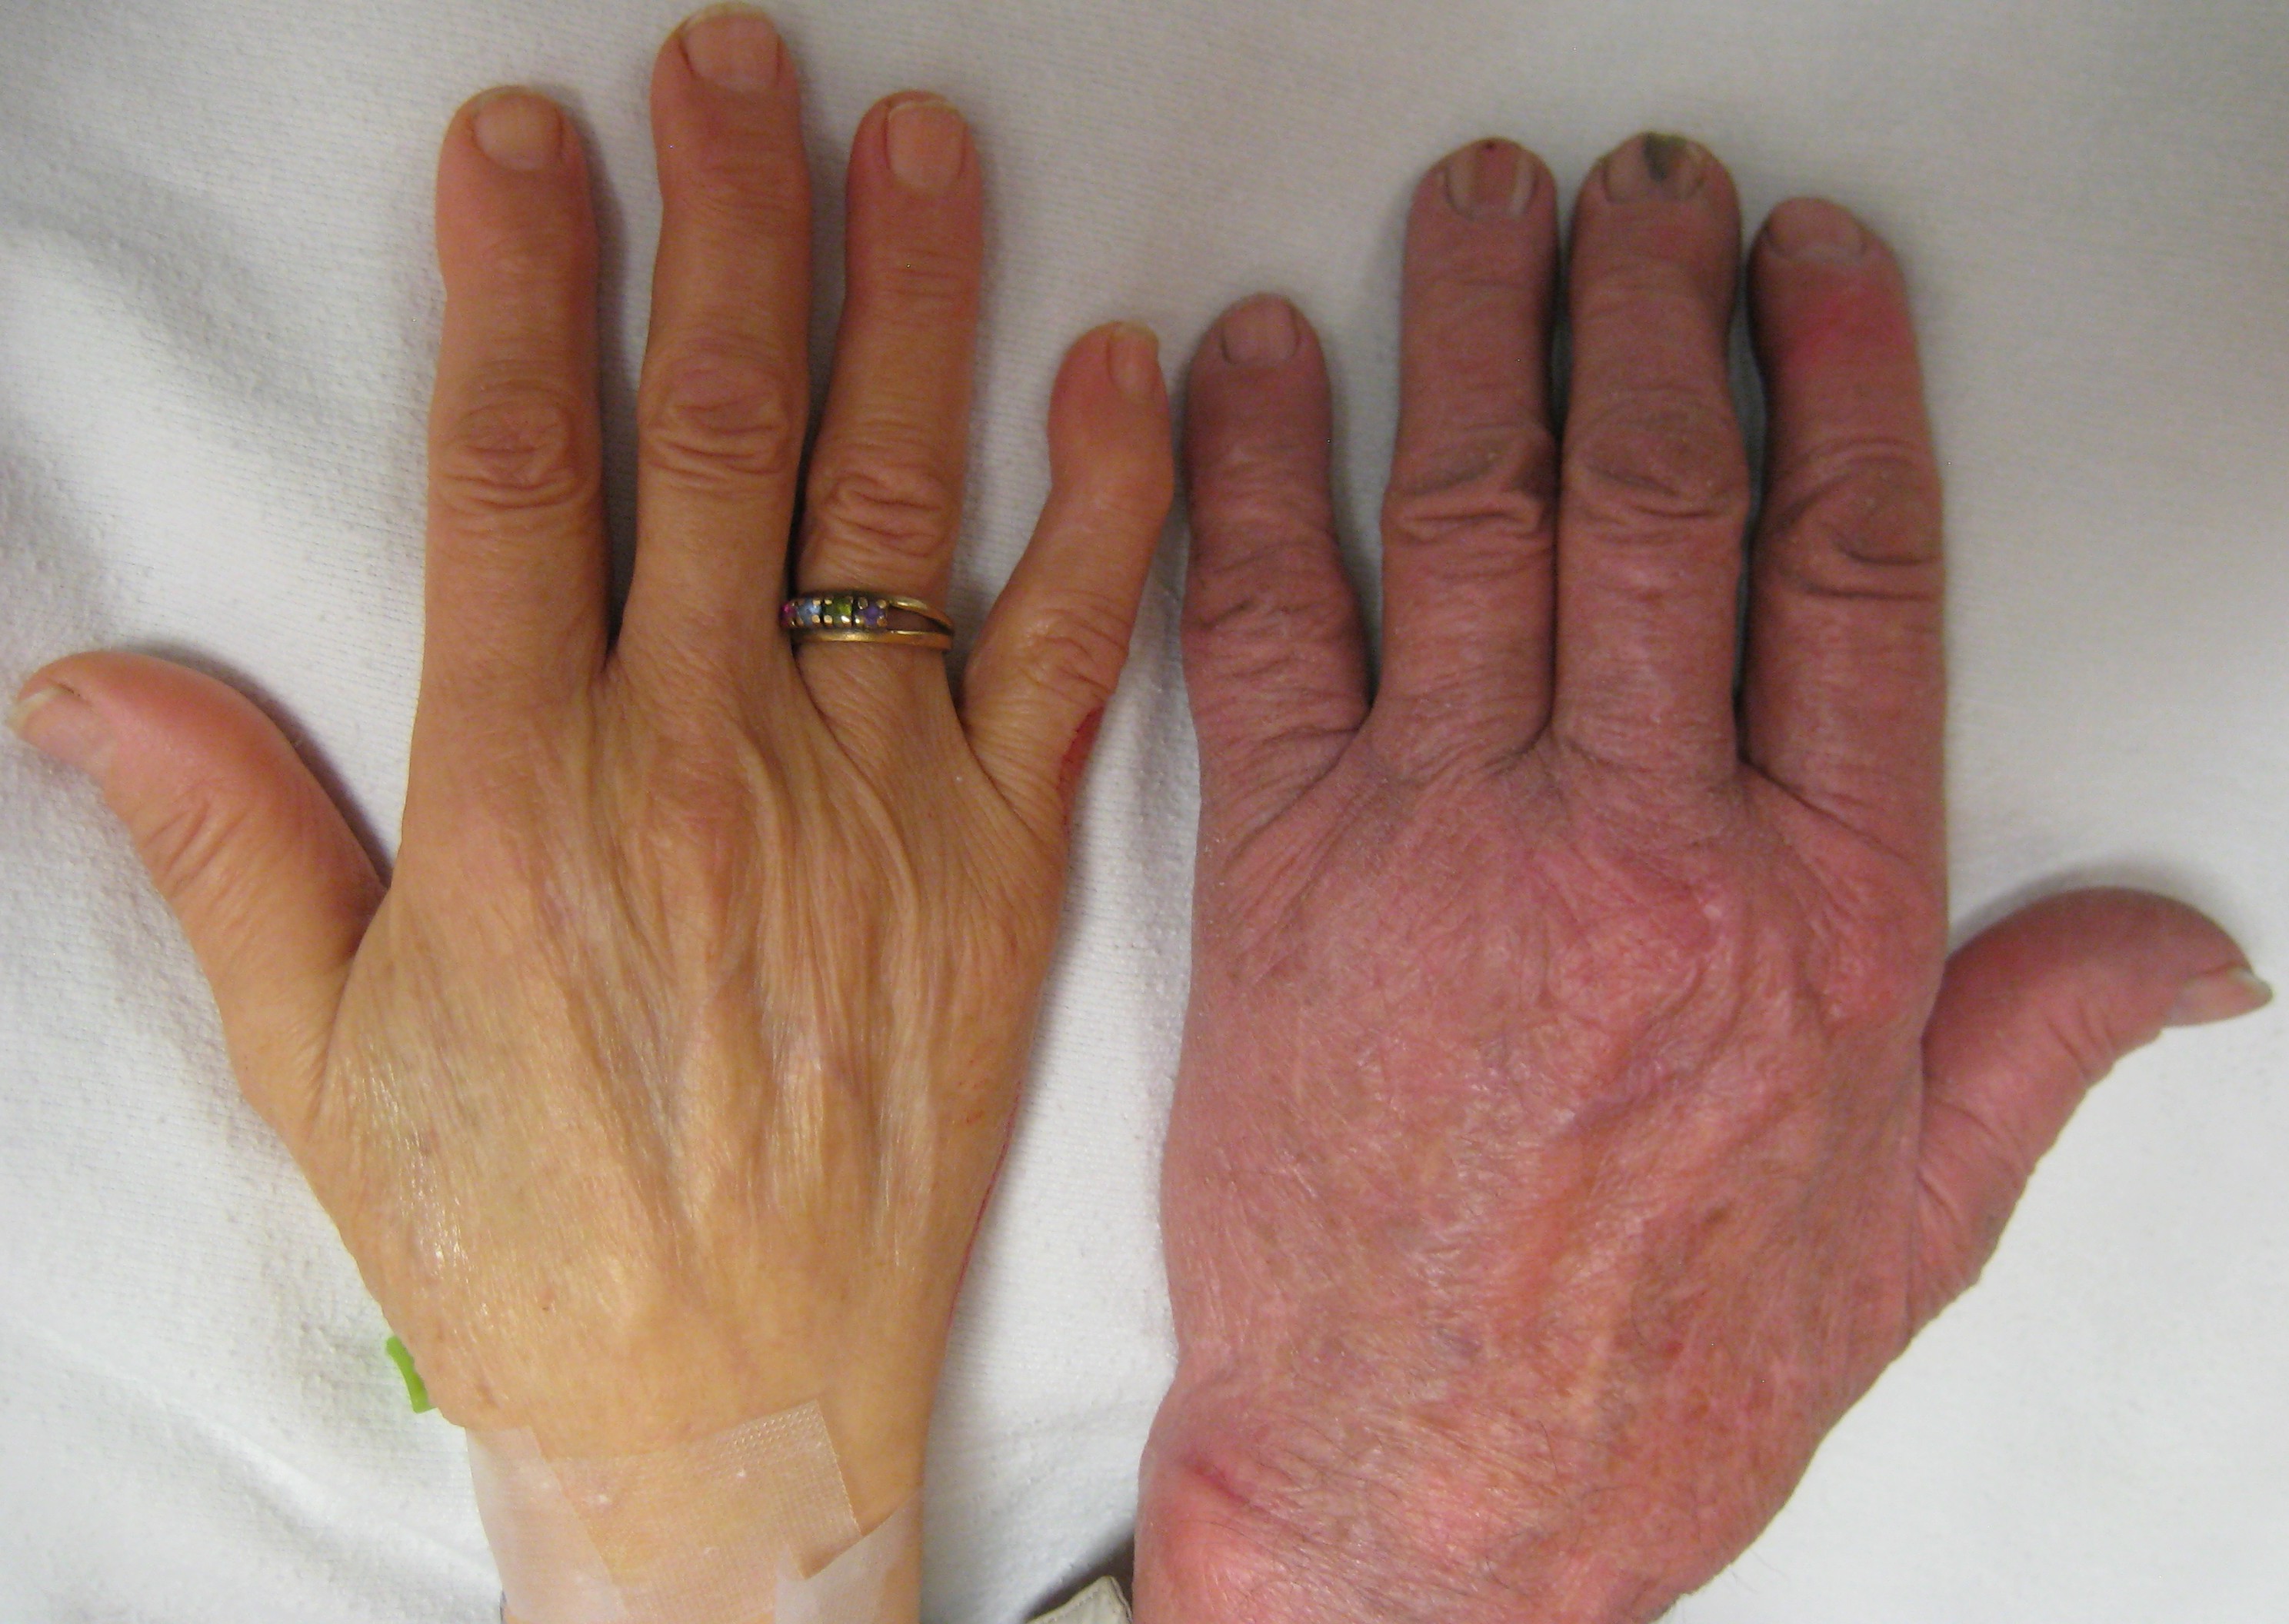 The hand of a person with severe anemia compared to one without (on the right) Source -James Heilman, MD - Own work[2]